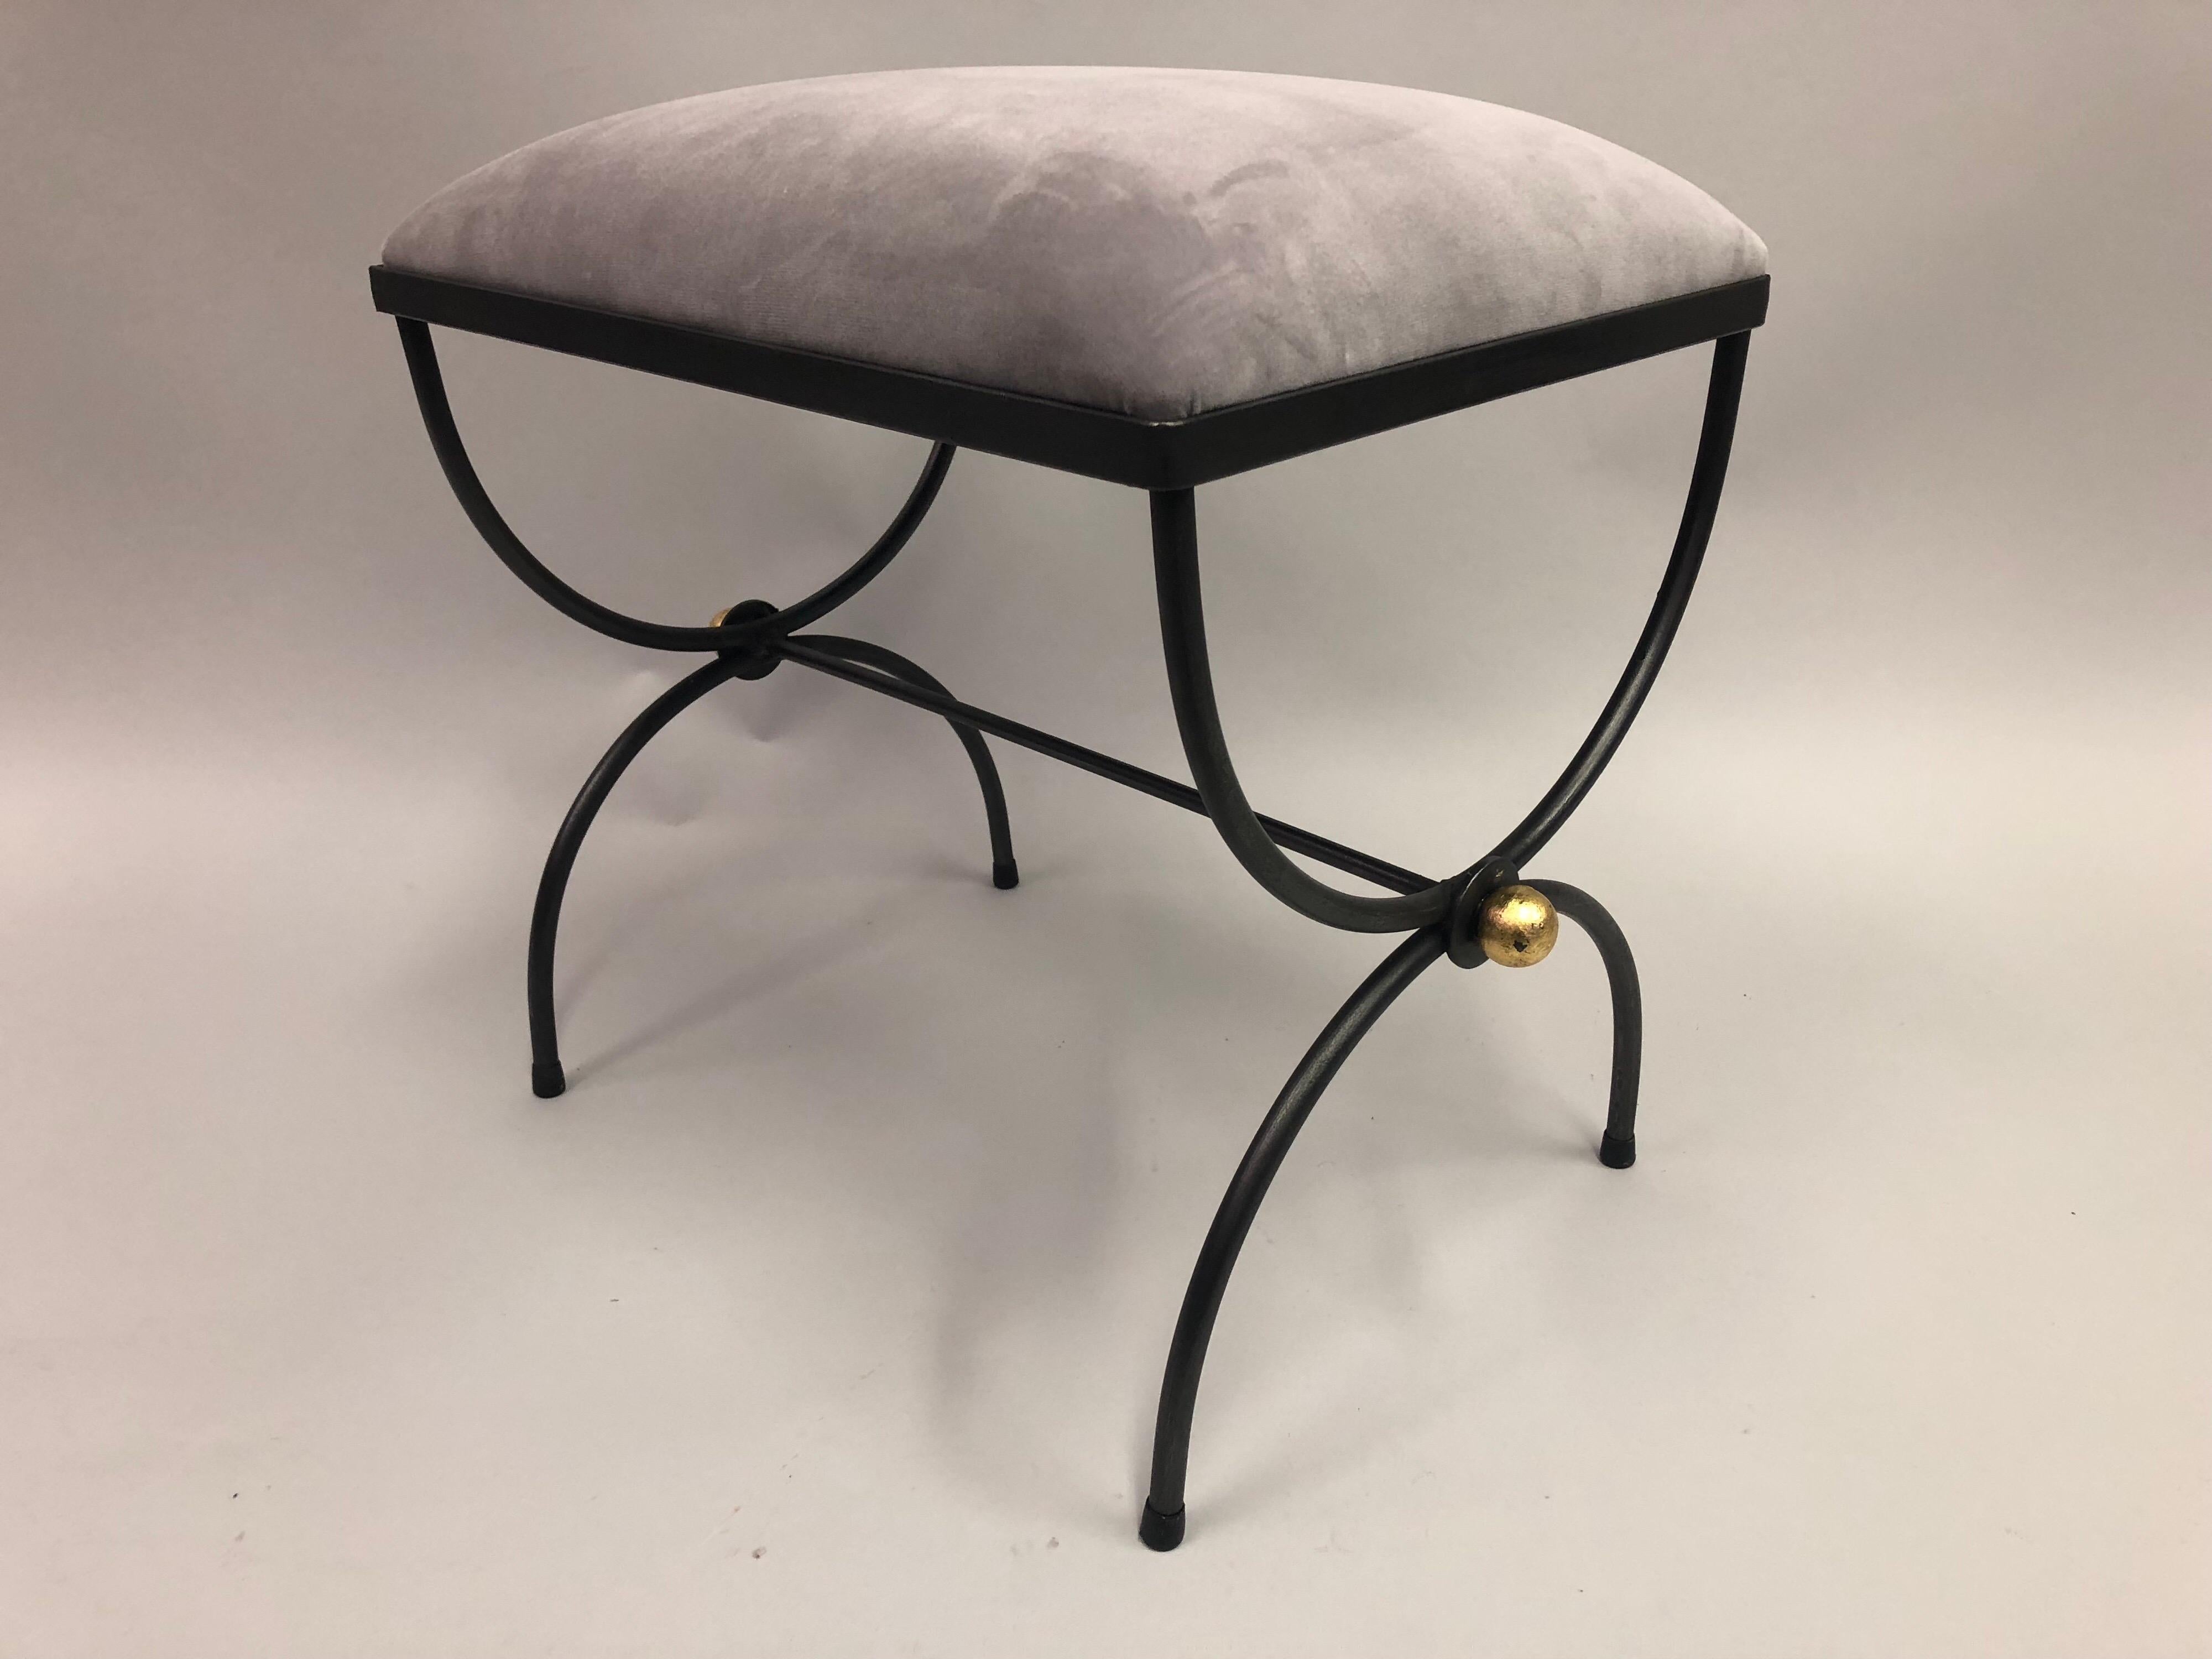 Pair of Mid-Century Modern Neoclassical Wrought Iron and Gilt Benches or Stools In Good Condition For Sale In New York, NY